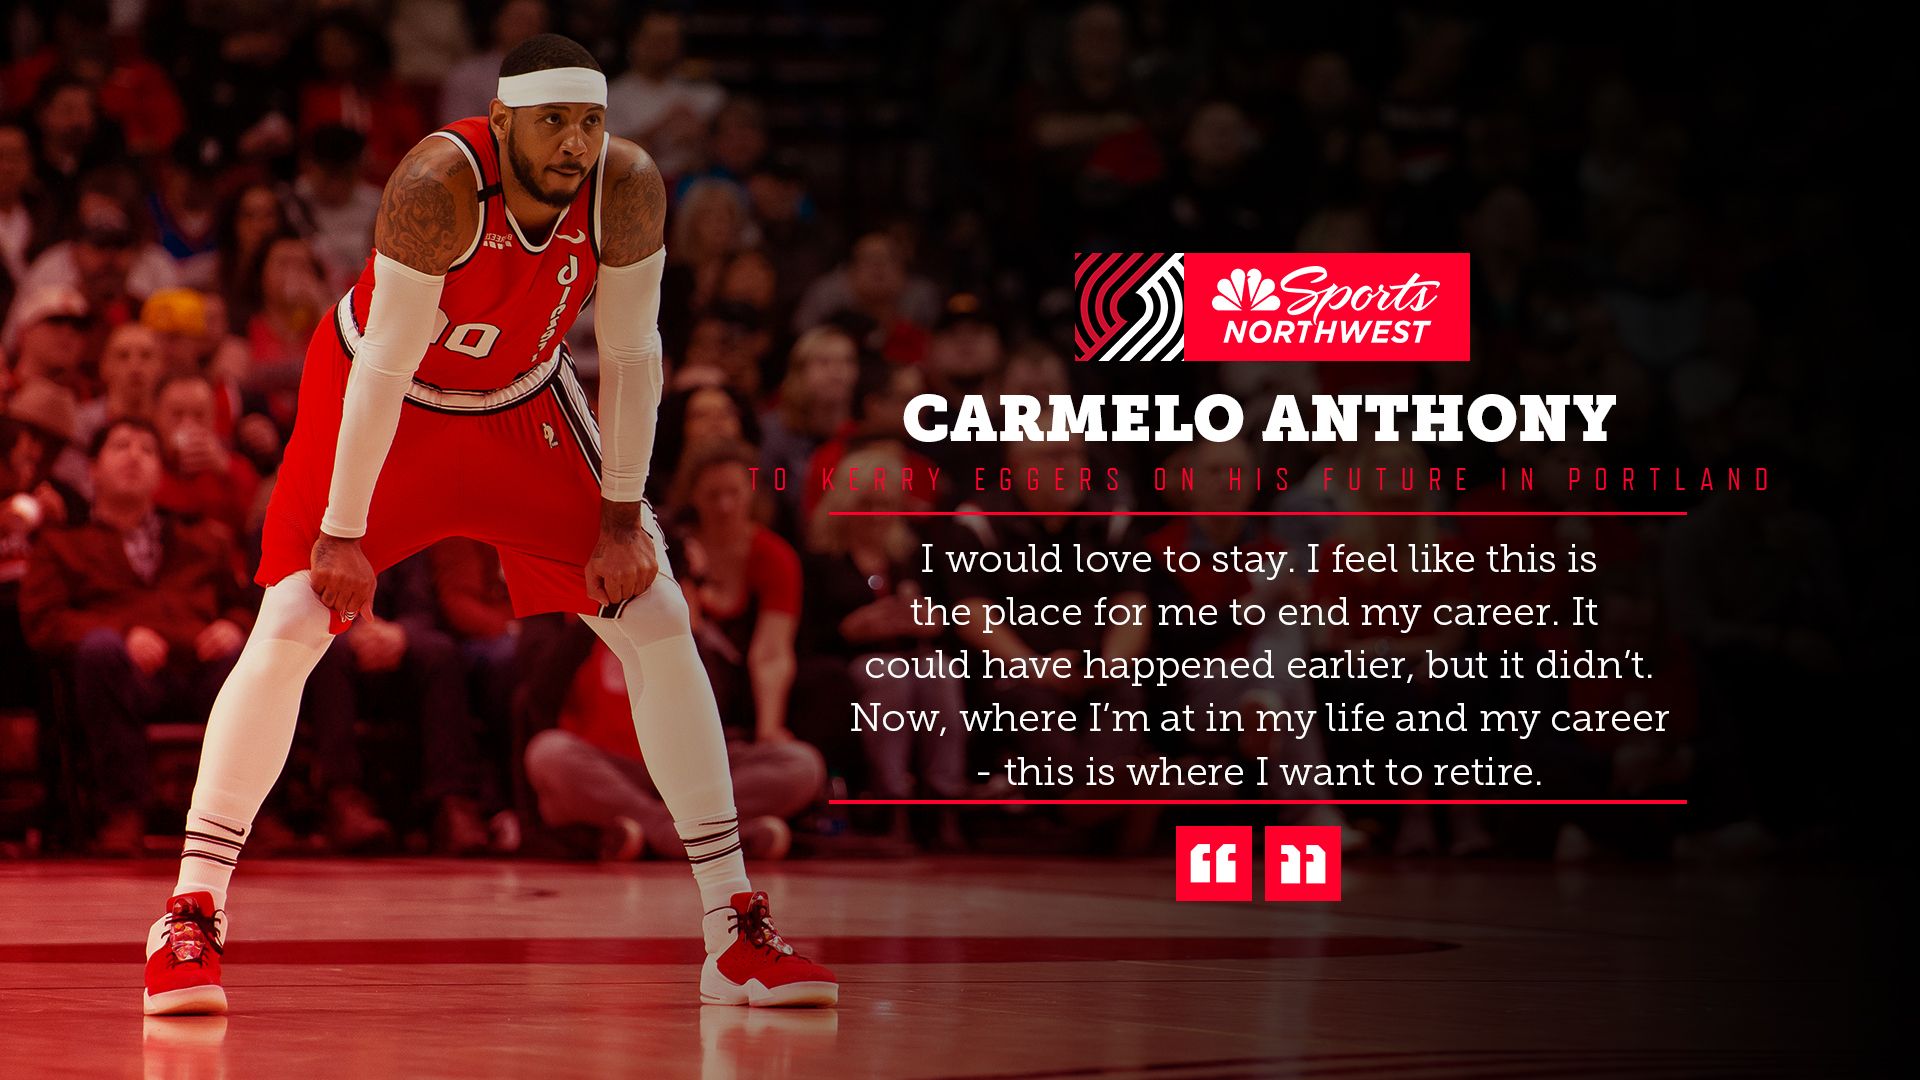 Carmelo Anthony on Portland: This is where I want to retire